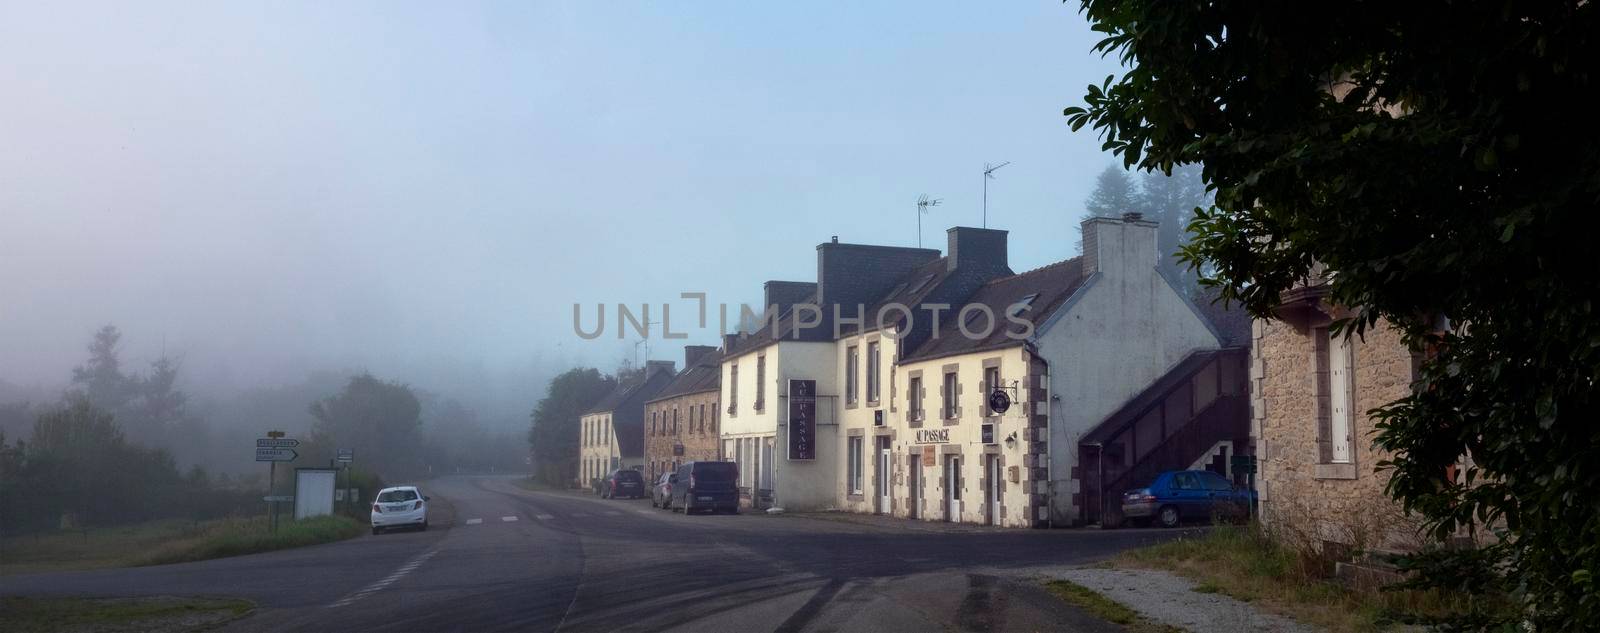 village along road in central brittany on early foggy morning by ahavelaar